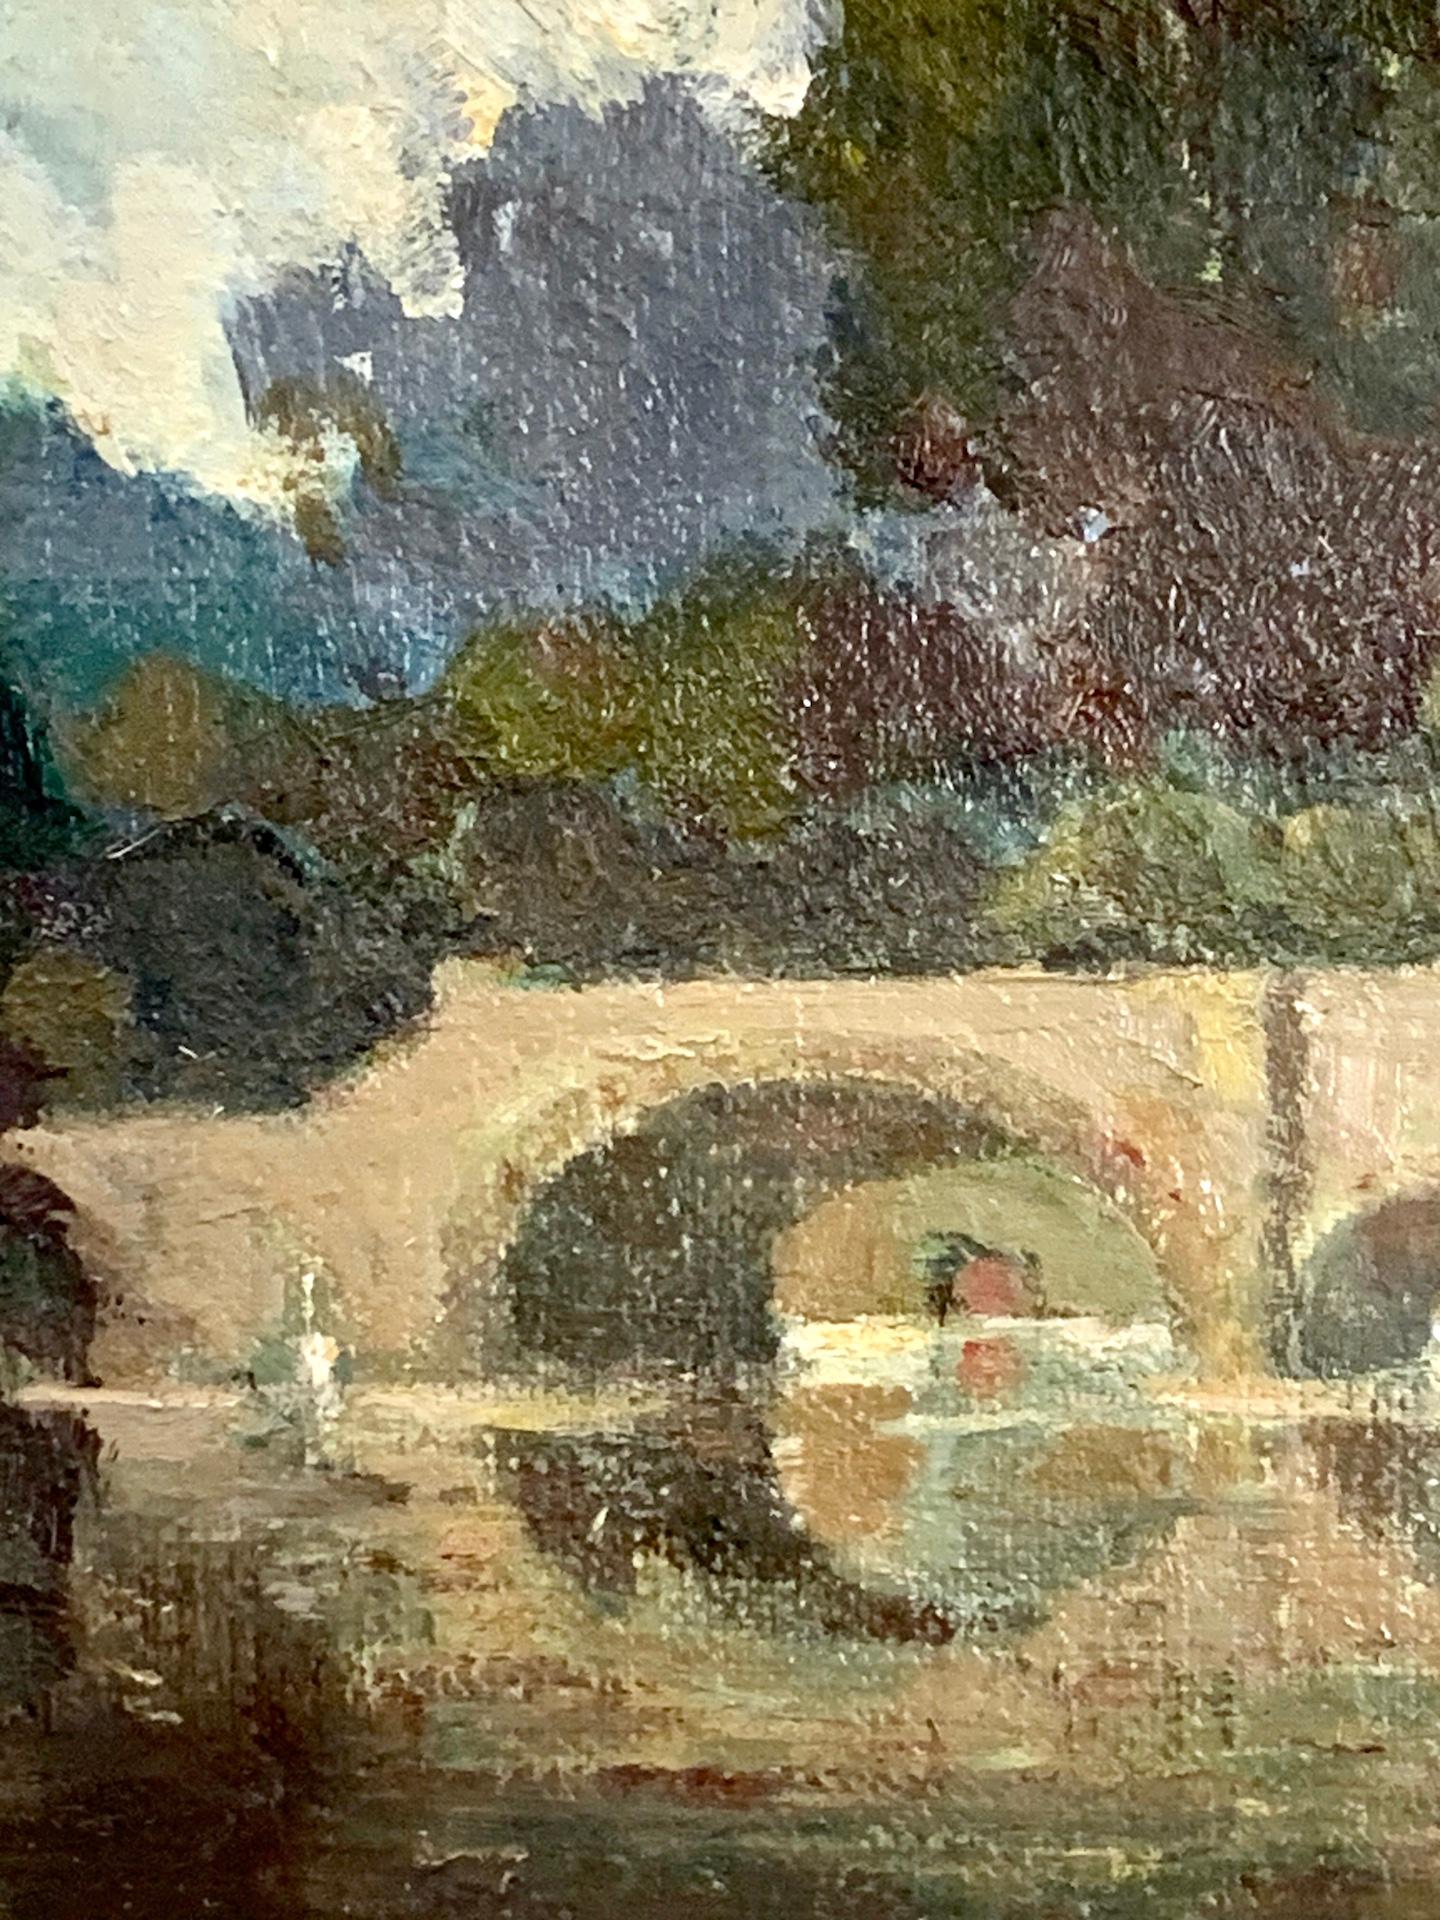 Robert W Hill,

20th Century Modern British Landscape with fisherman, bridge, trees.

English painter of landscape, portraits and modern British scenes. 

He exhibited at all NEAC, the Royal Society of Portrait Painters, and other important